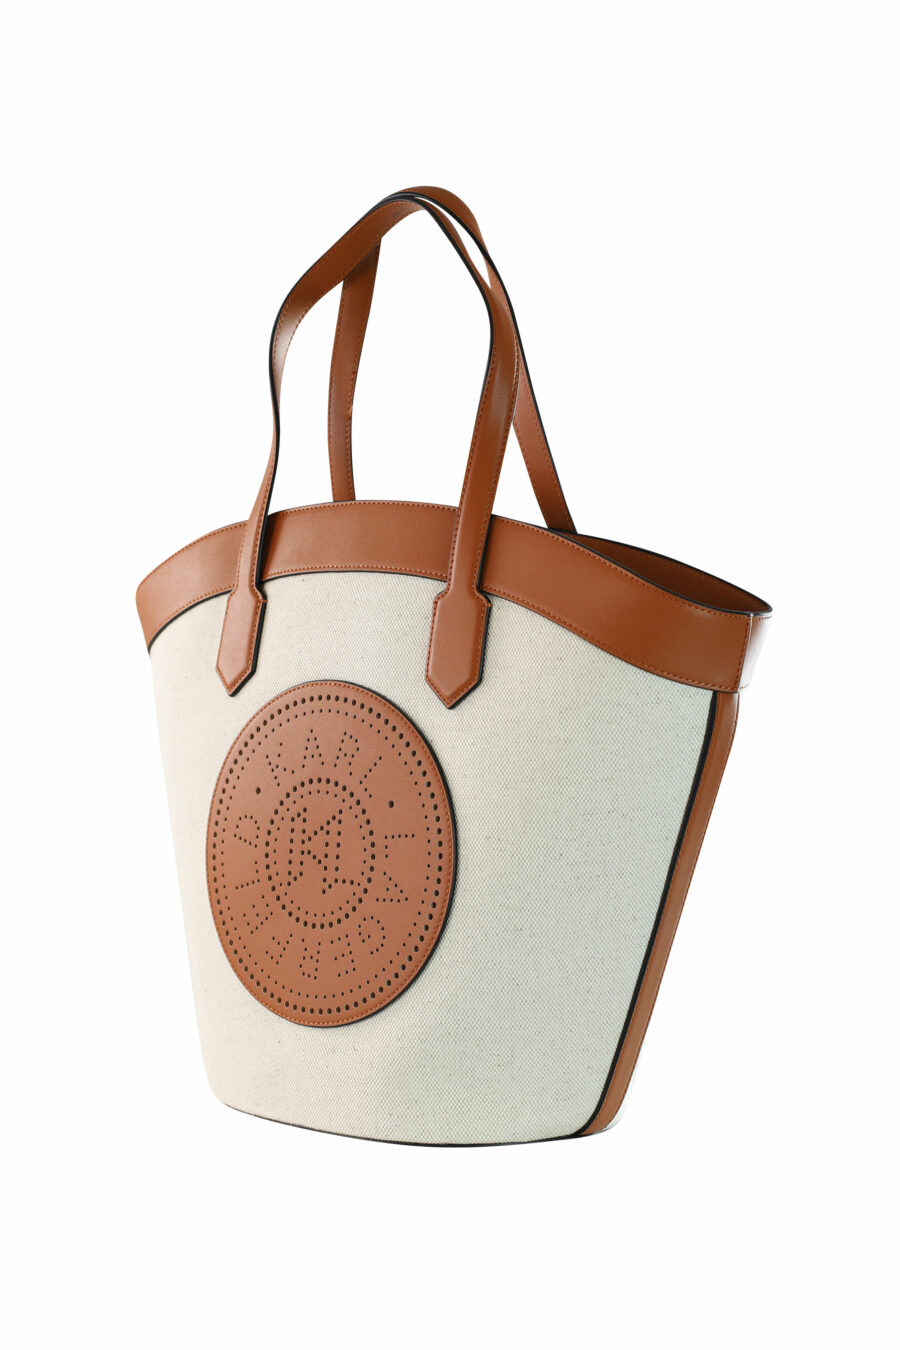 Tote bag white with brown and "k/tulip" logo - 8720744234777 2